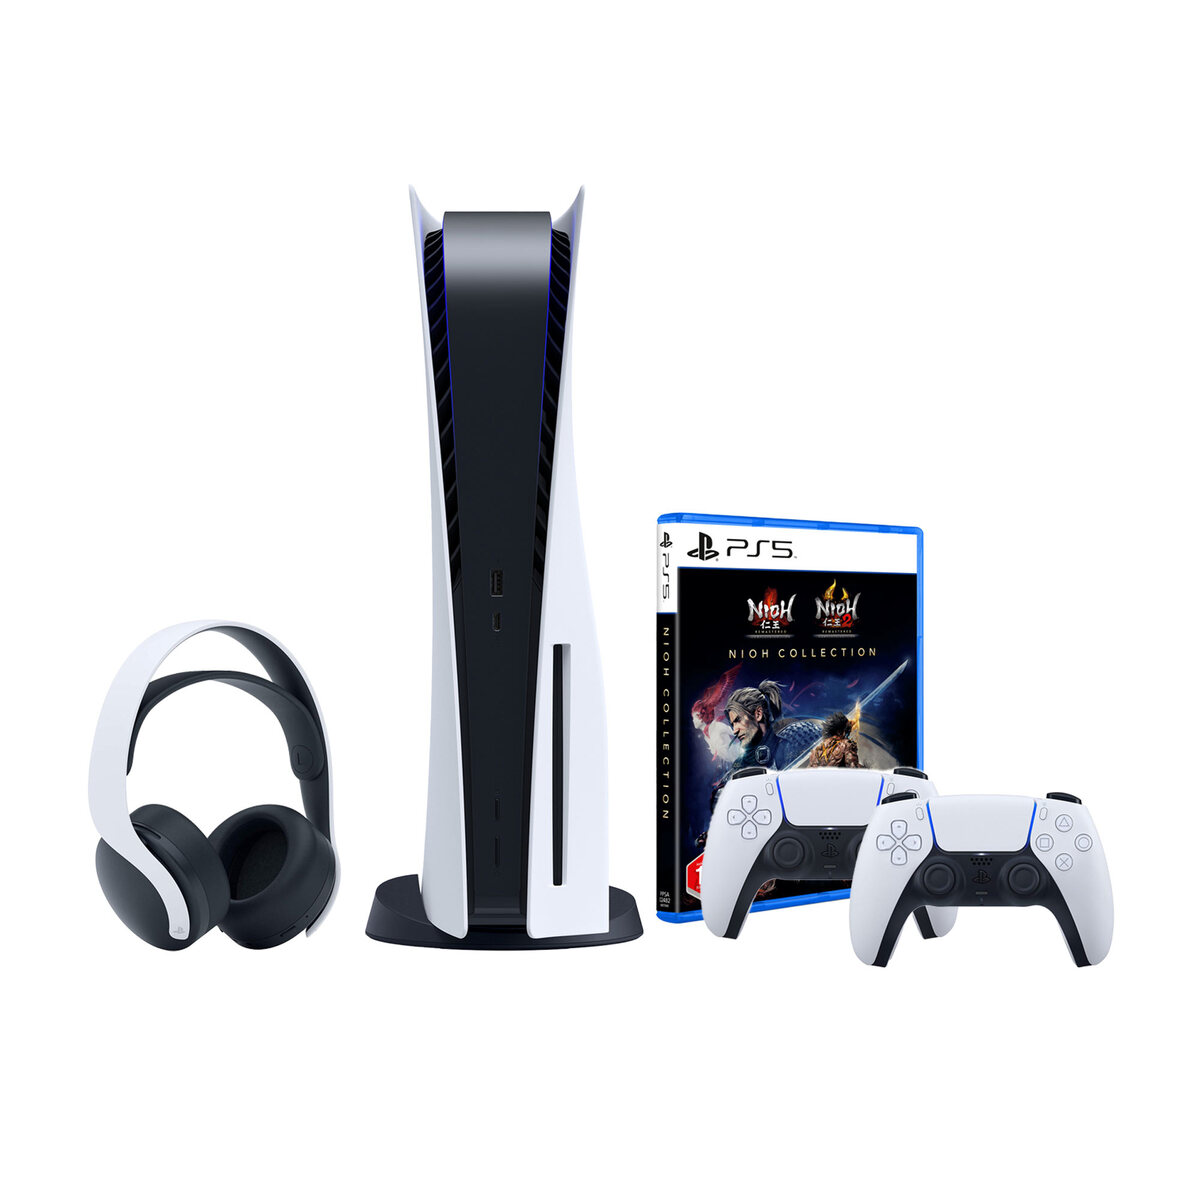 Sony PS5 Console 825GB SSD + DualSense Wireless Controller White + Pulse 3D Wireless Headset for PS5, White + Sony PS5 Nioh Collection